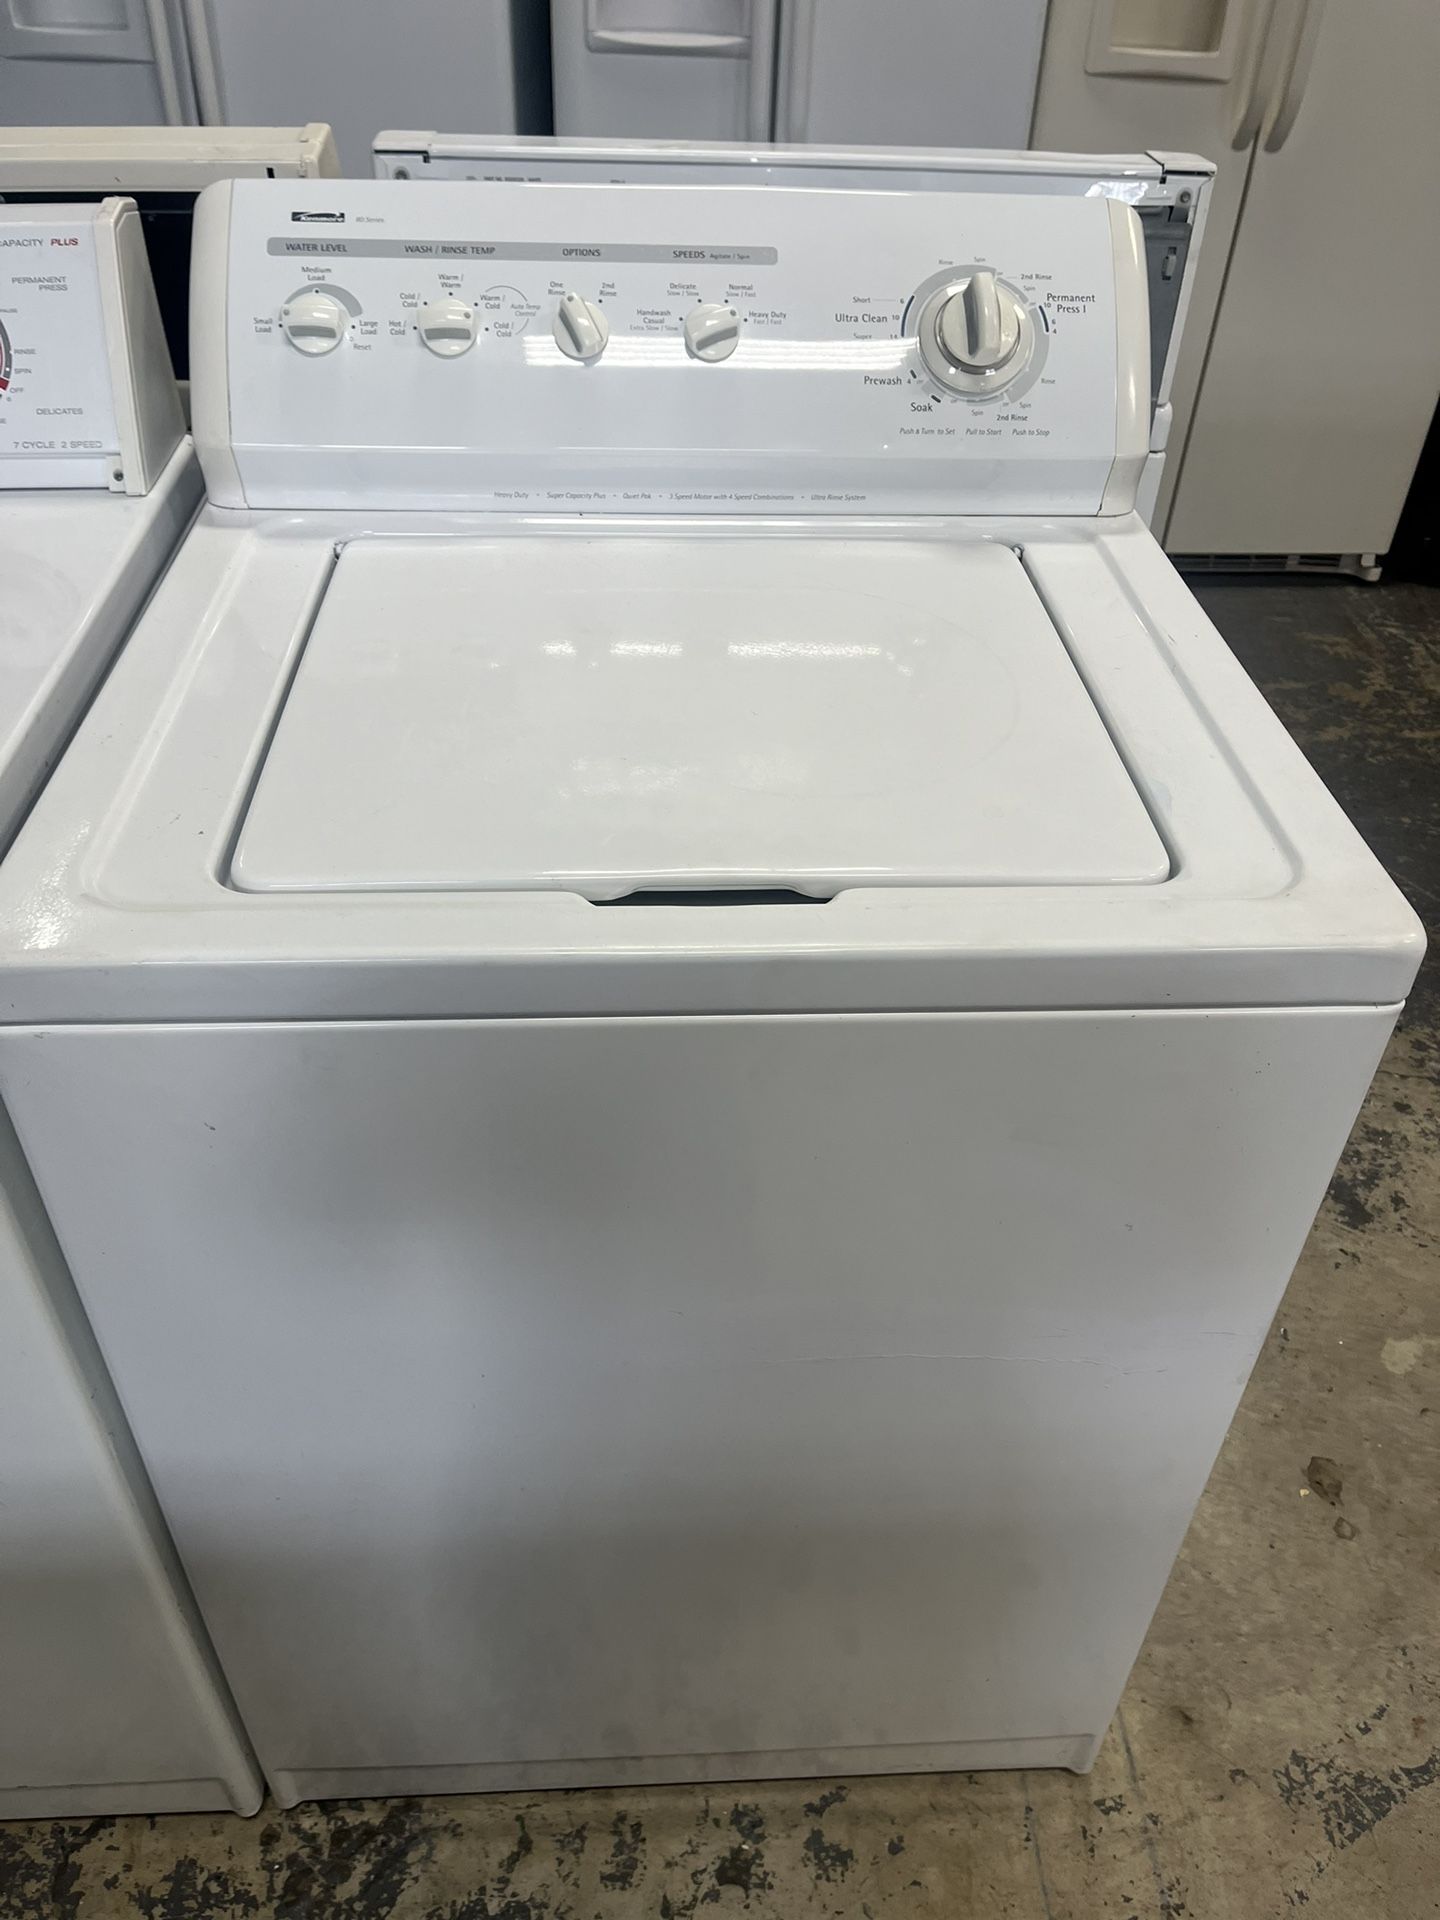 Washer Kenmore 